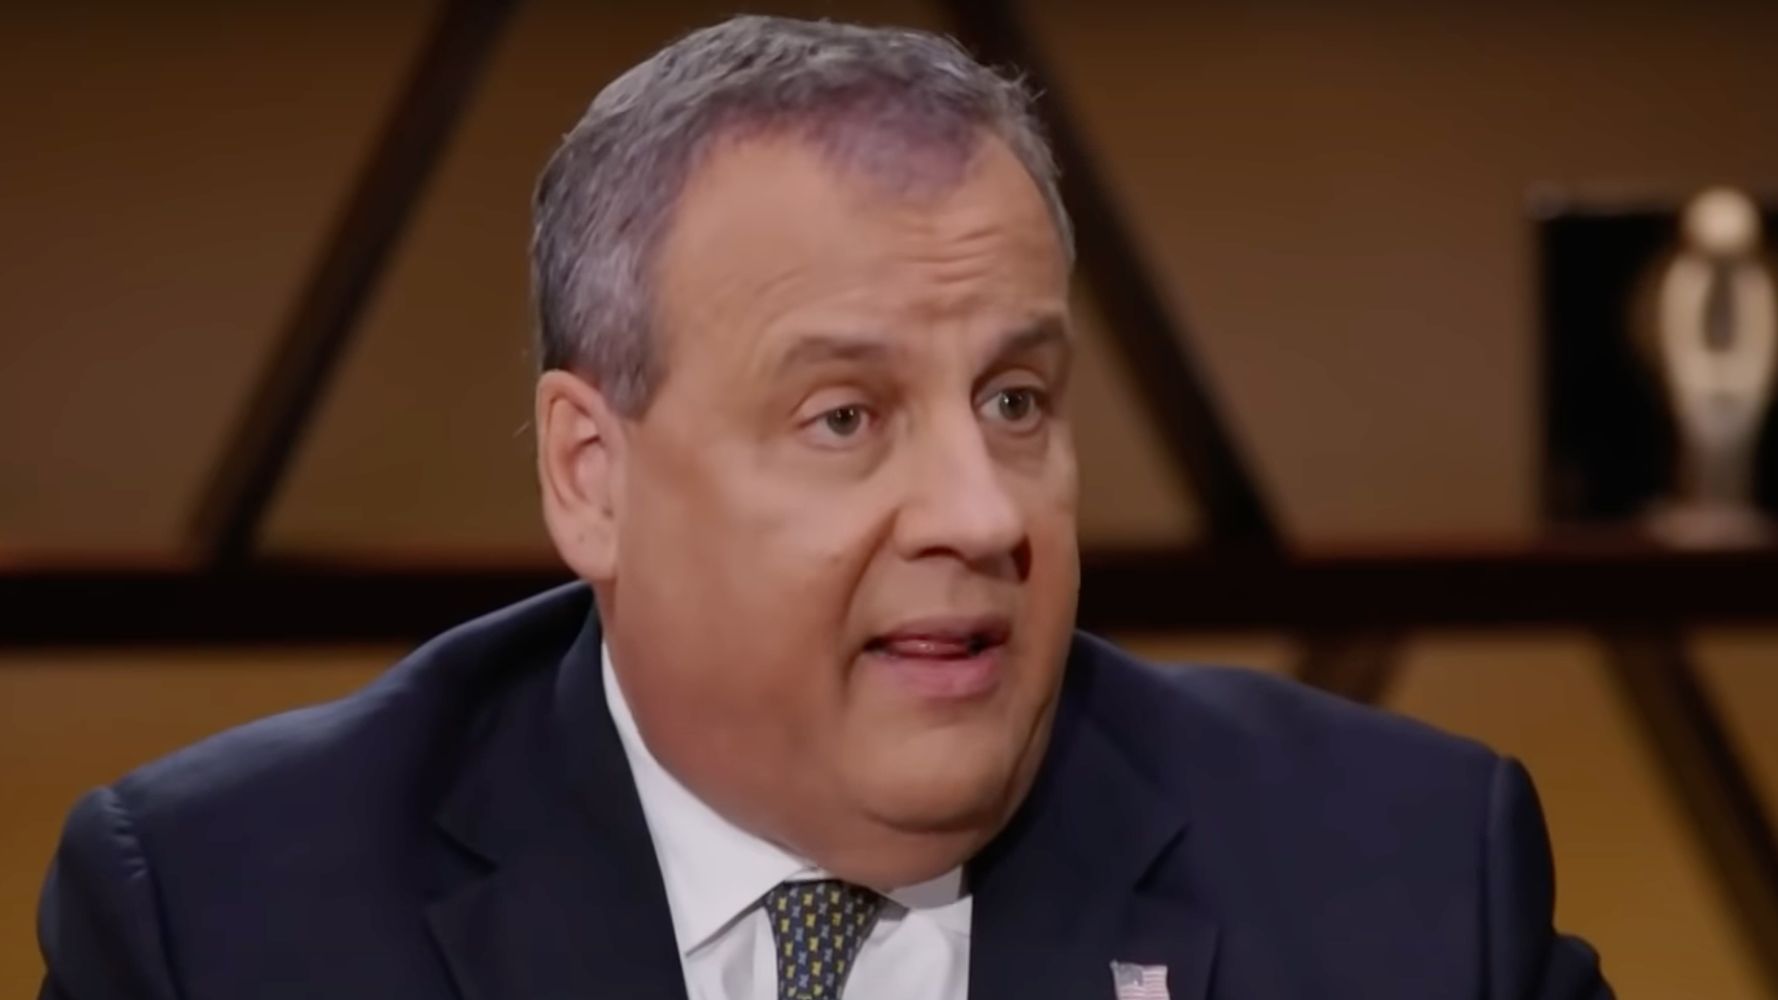 Chris Christie Explains Why He’ll Run Against Donald Trump With A Dwight Eisenhower Ding